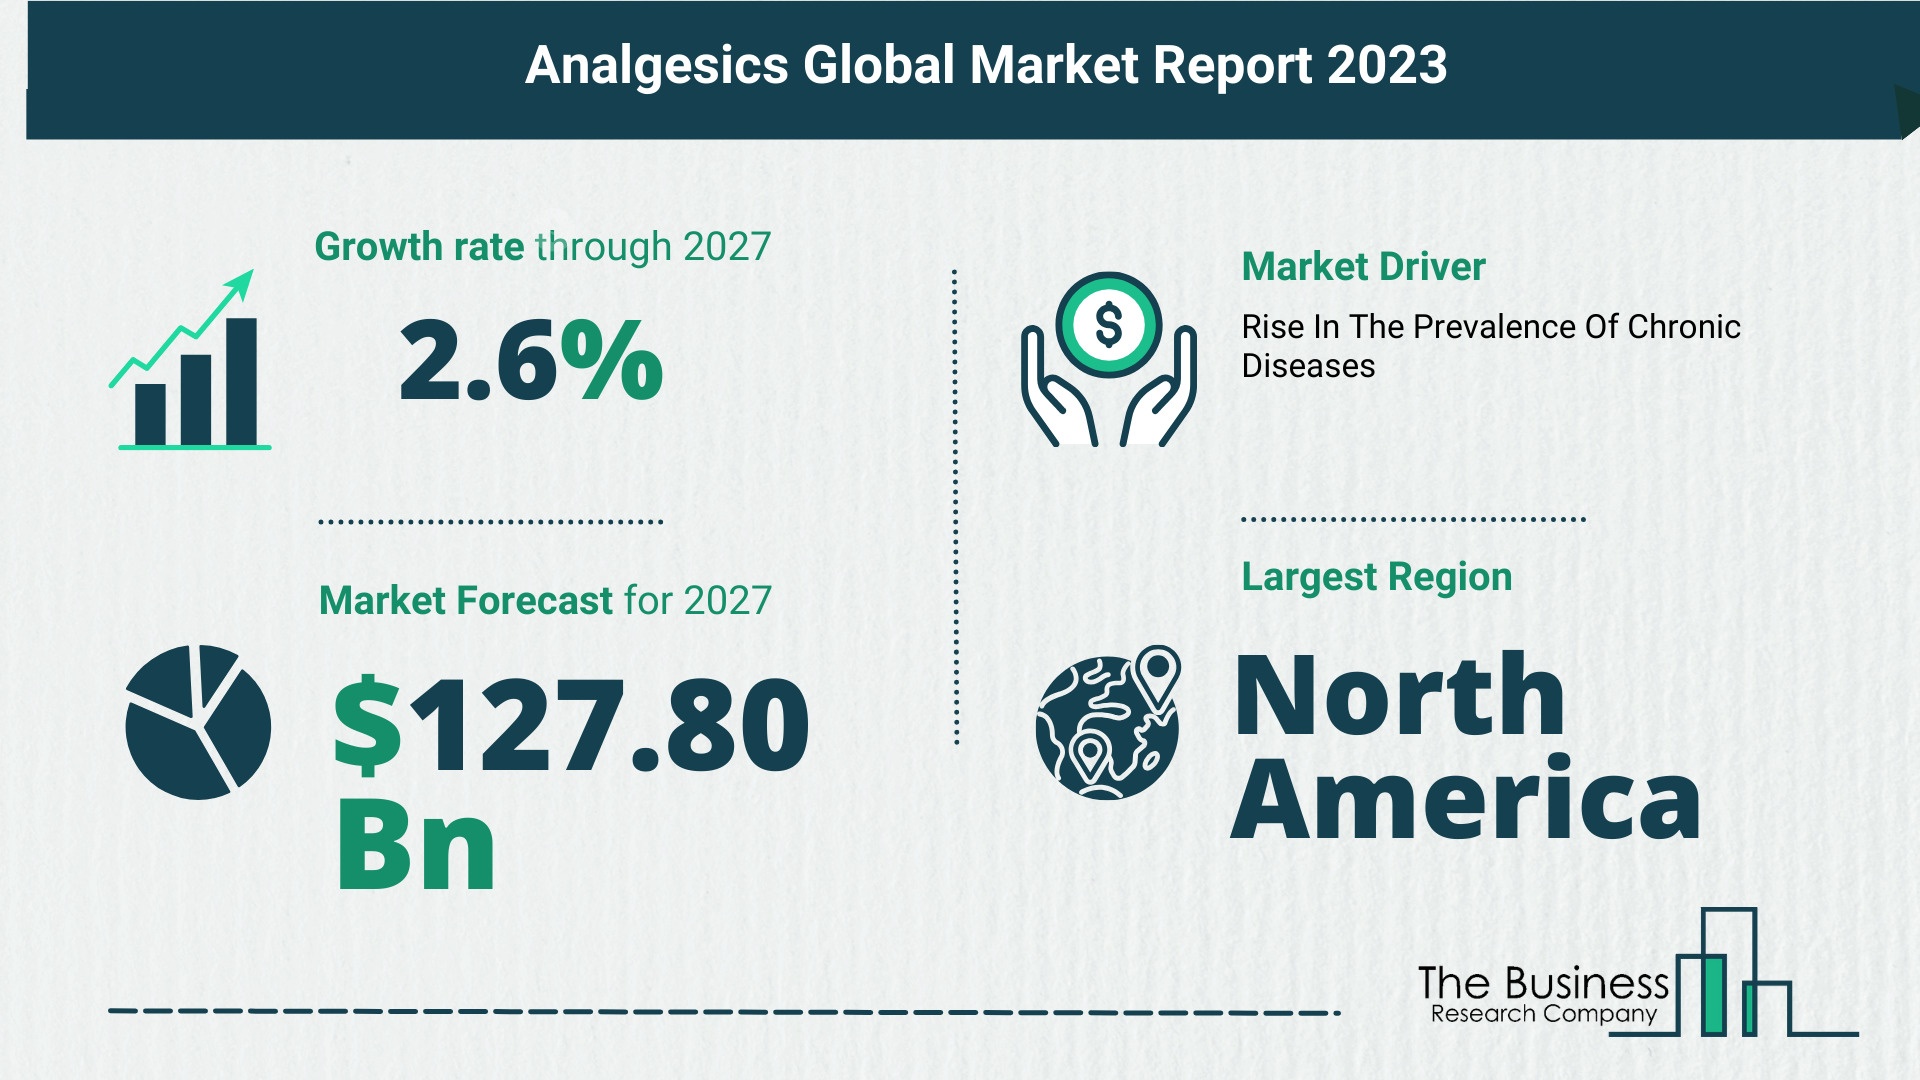 Key Trends And Drivers In The Analgesics Market 2023